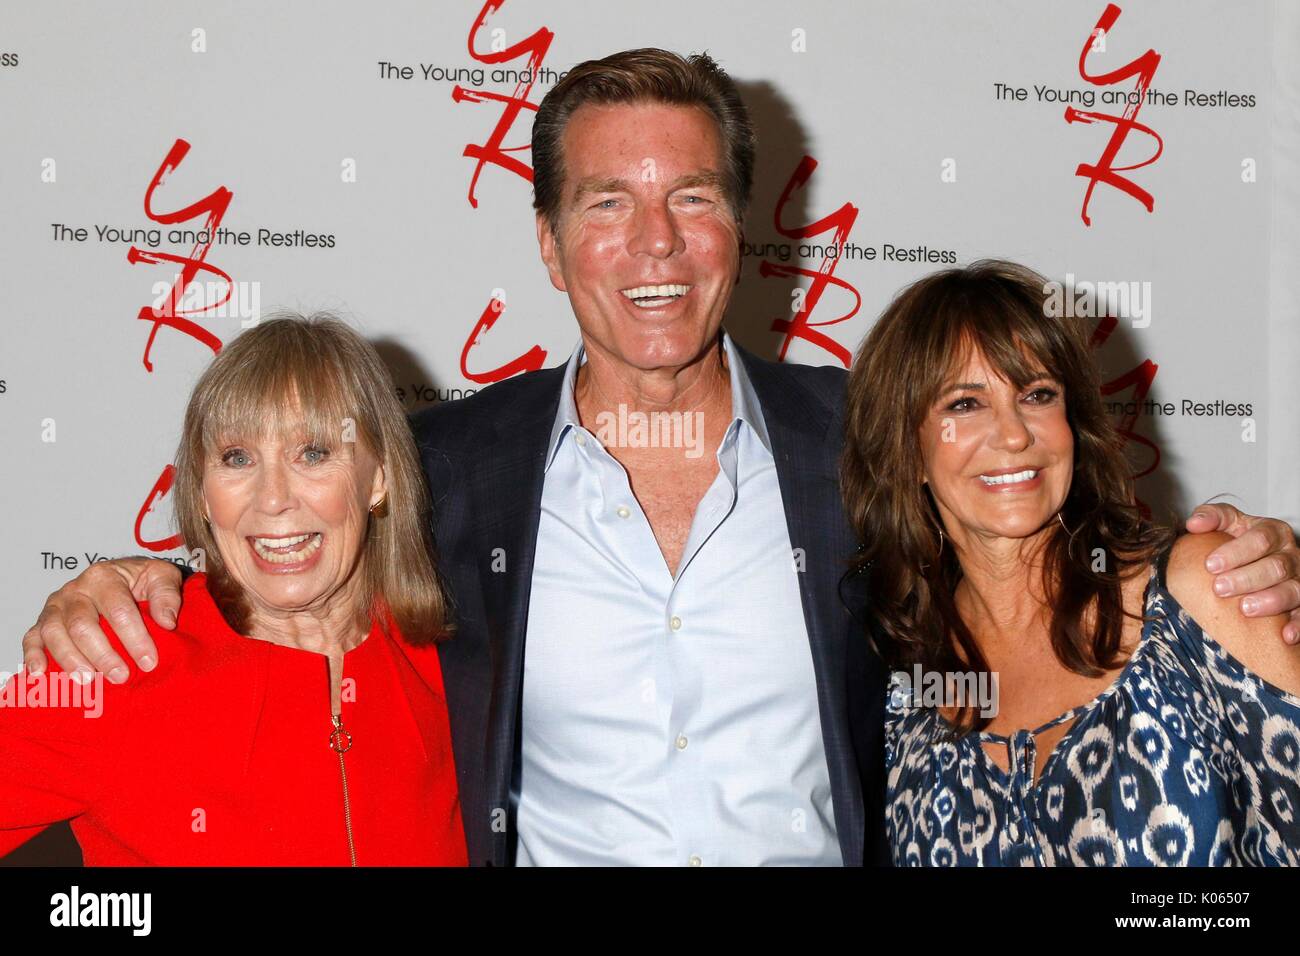 Burbank, CA. 19th Aug, 2017. Marla Adams, Jess Walton, Peter Bergman in attendance for YOUNG AND RESTLESS Fan Club Dinner, Burbank Convention Center, Burbank, CA August 19, 2017. Credit: Priscilla Grant/Everett Collection/Alamy Live News Stock Photo